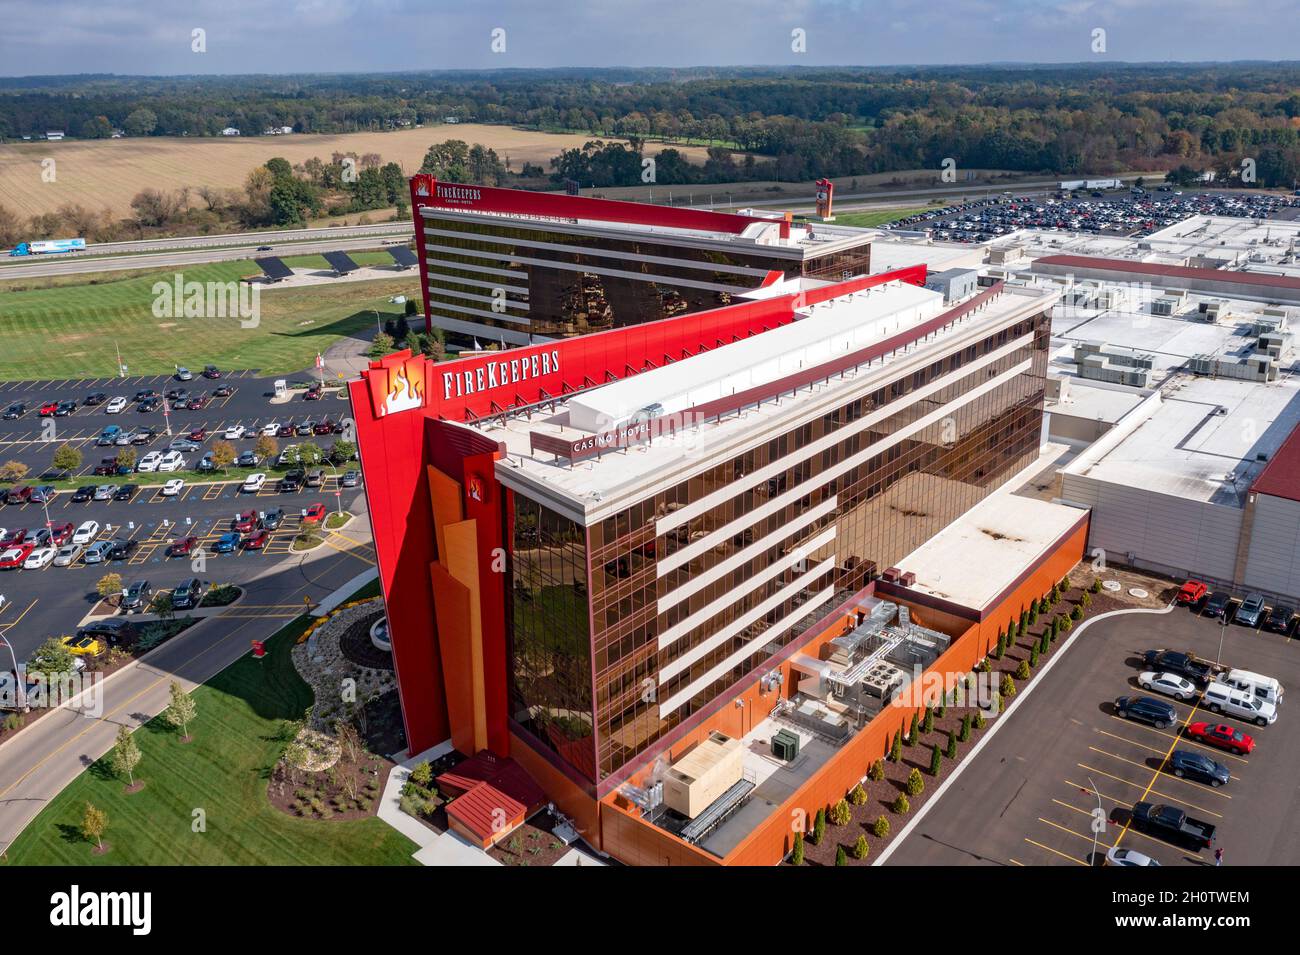 Battle Creek, Michigan - The FireKeepers Casino and Hotel. It is owned and operated by the Nottawaseppi Huron Band of Potawatomi Indians. Stock Photo